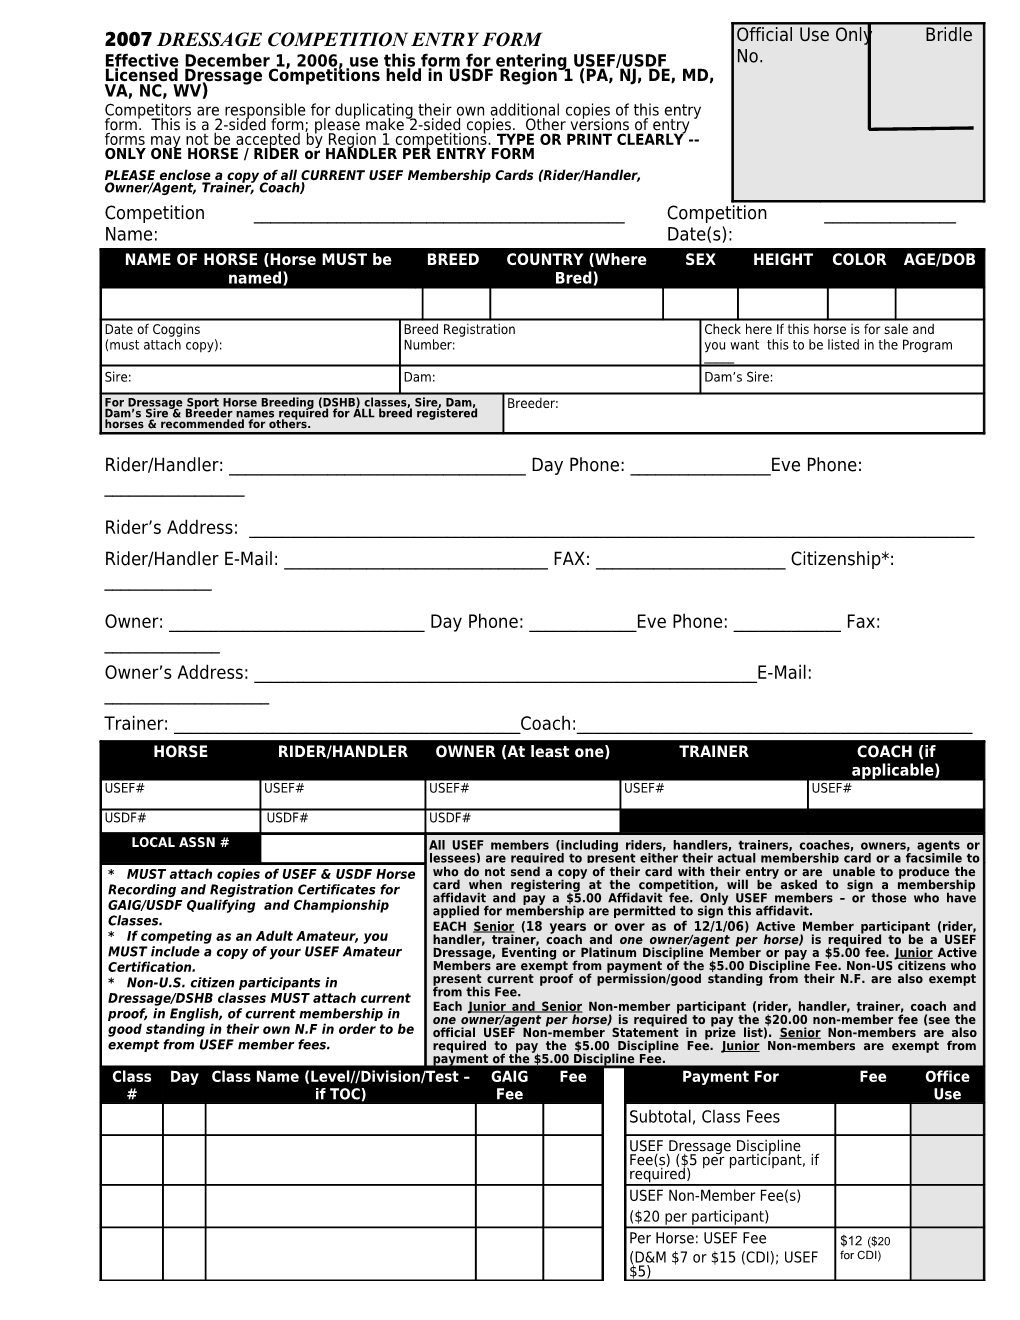 1999 USDF Region 1 Entry Form - Front Page